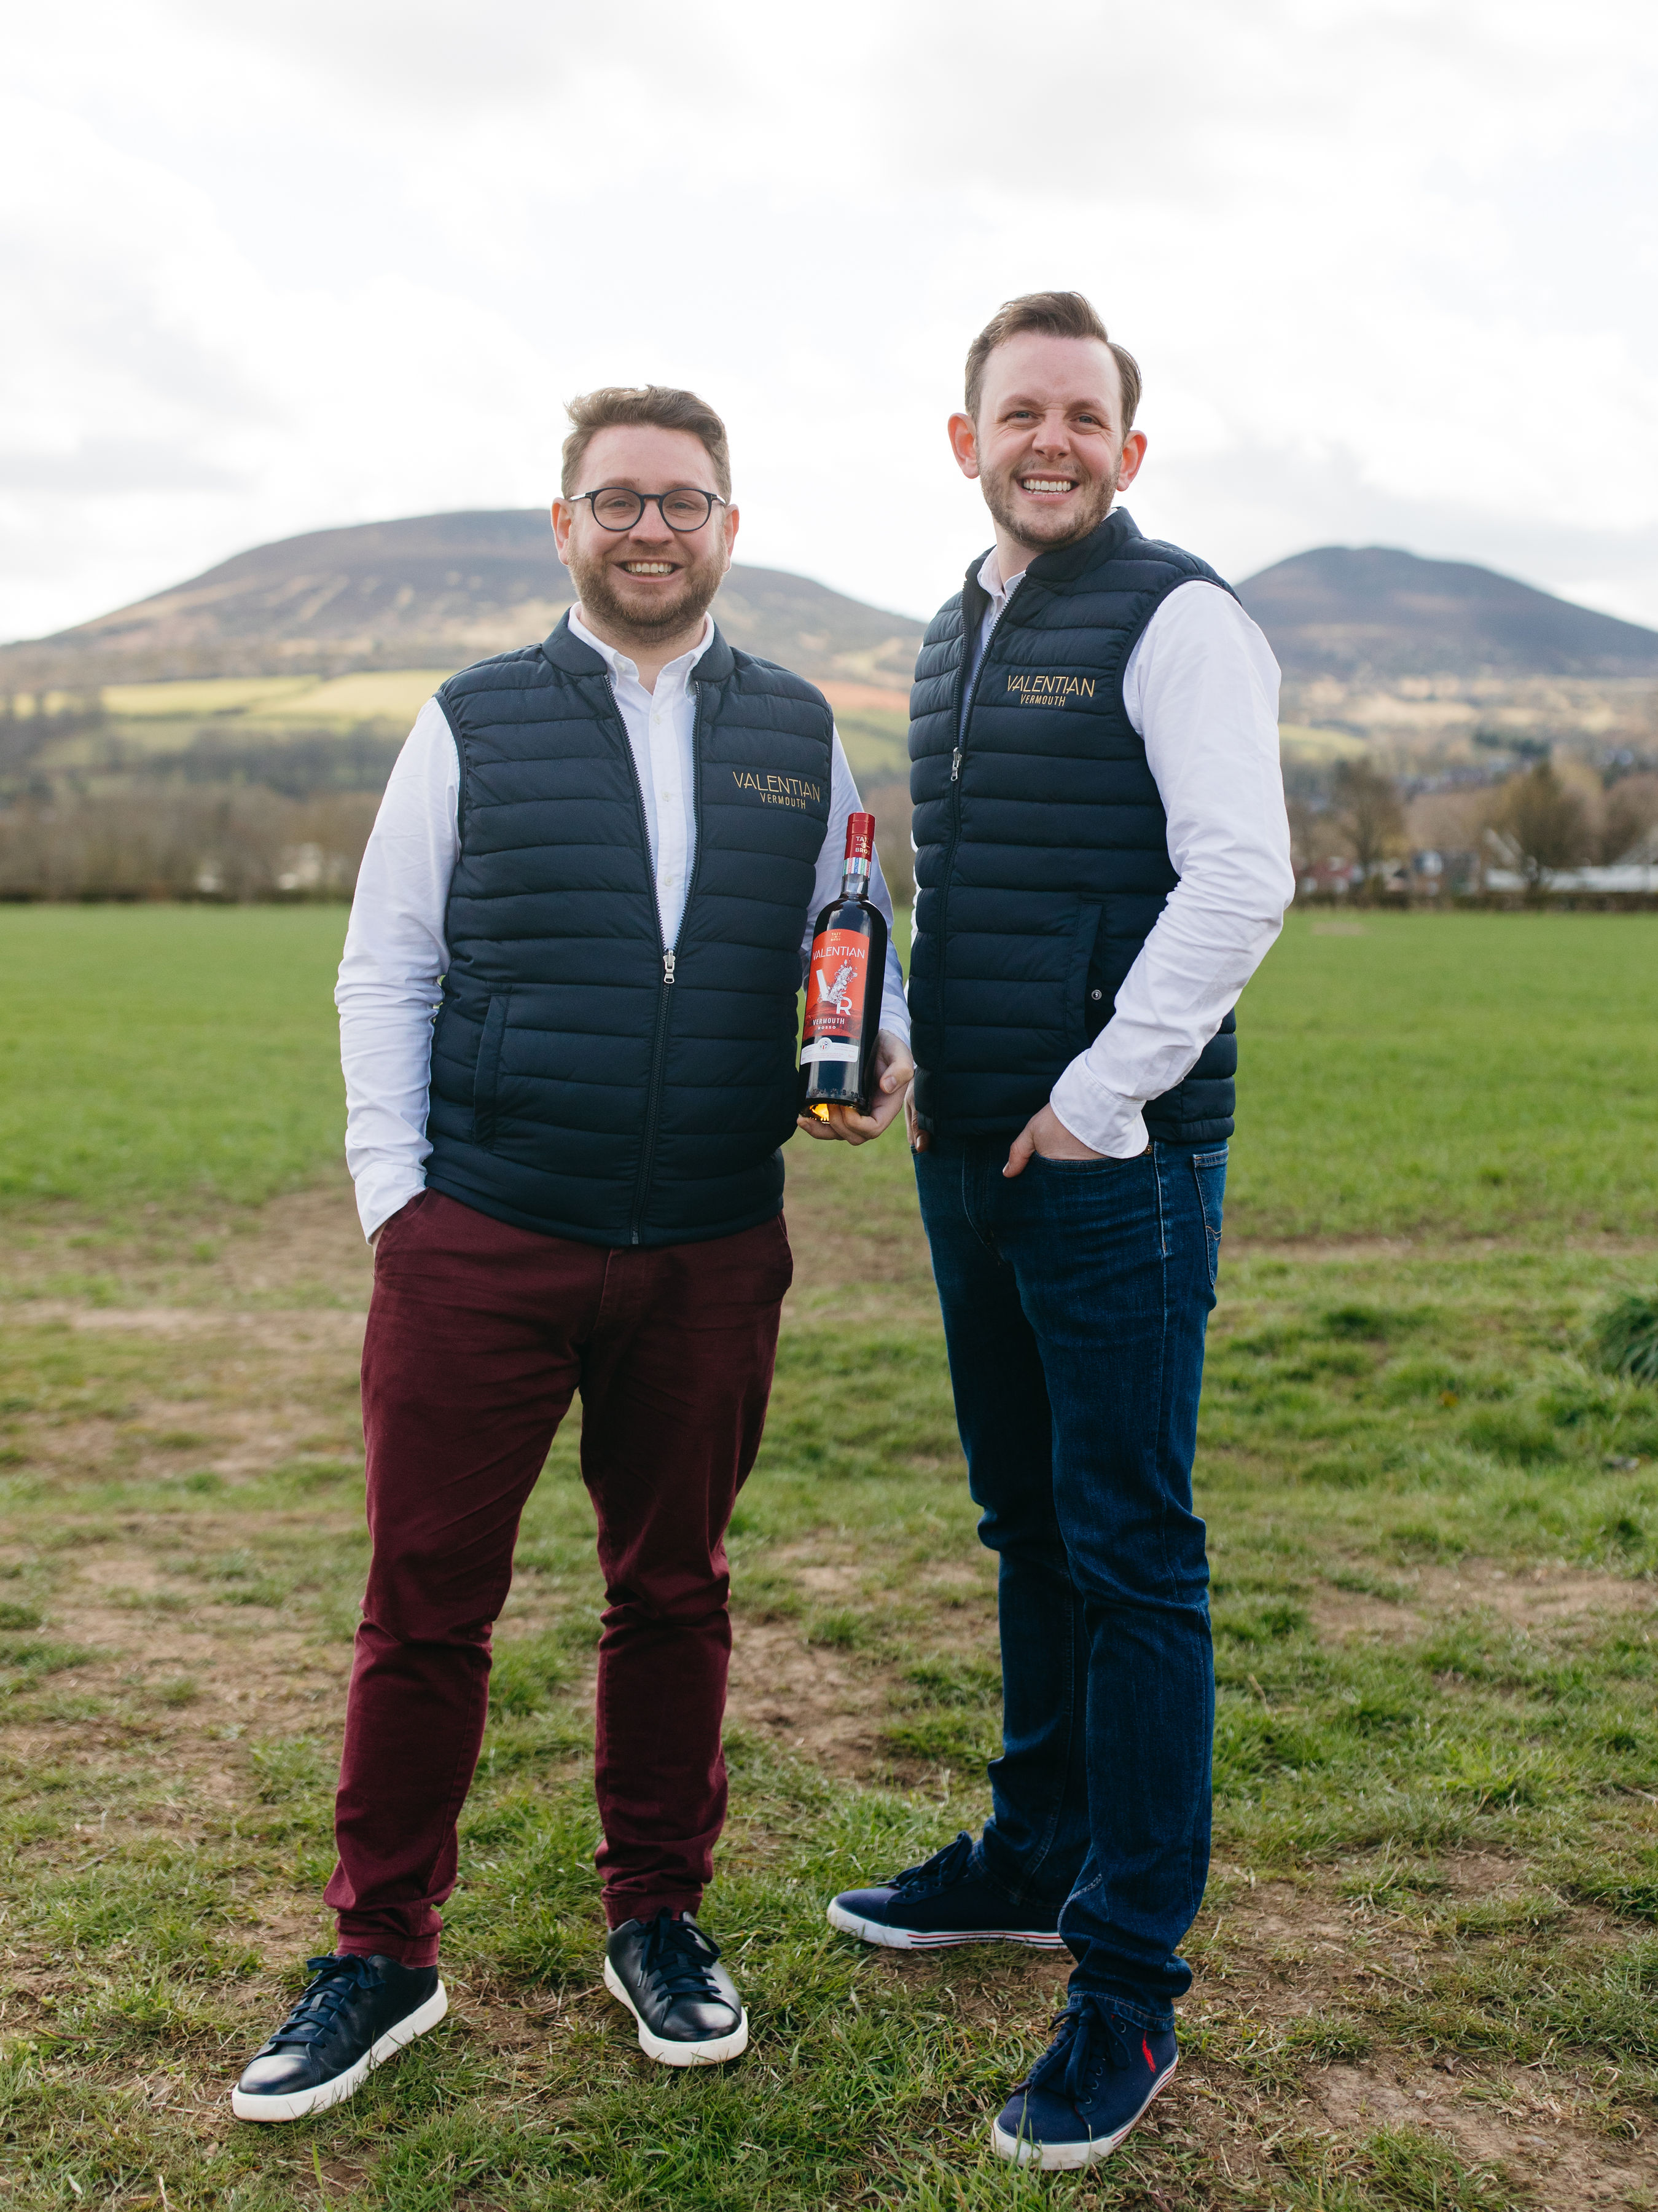 Scottish vermouth maker begins expansion drive after crowdfunding campaign hits target in less than 48 hours